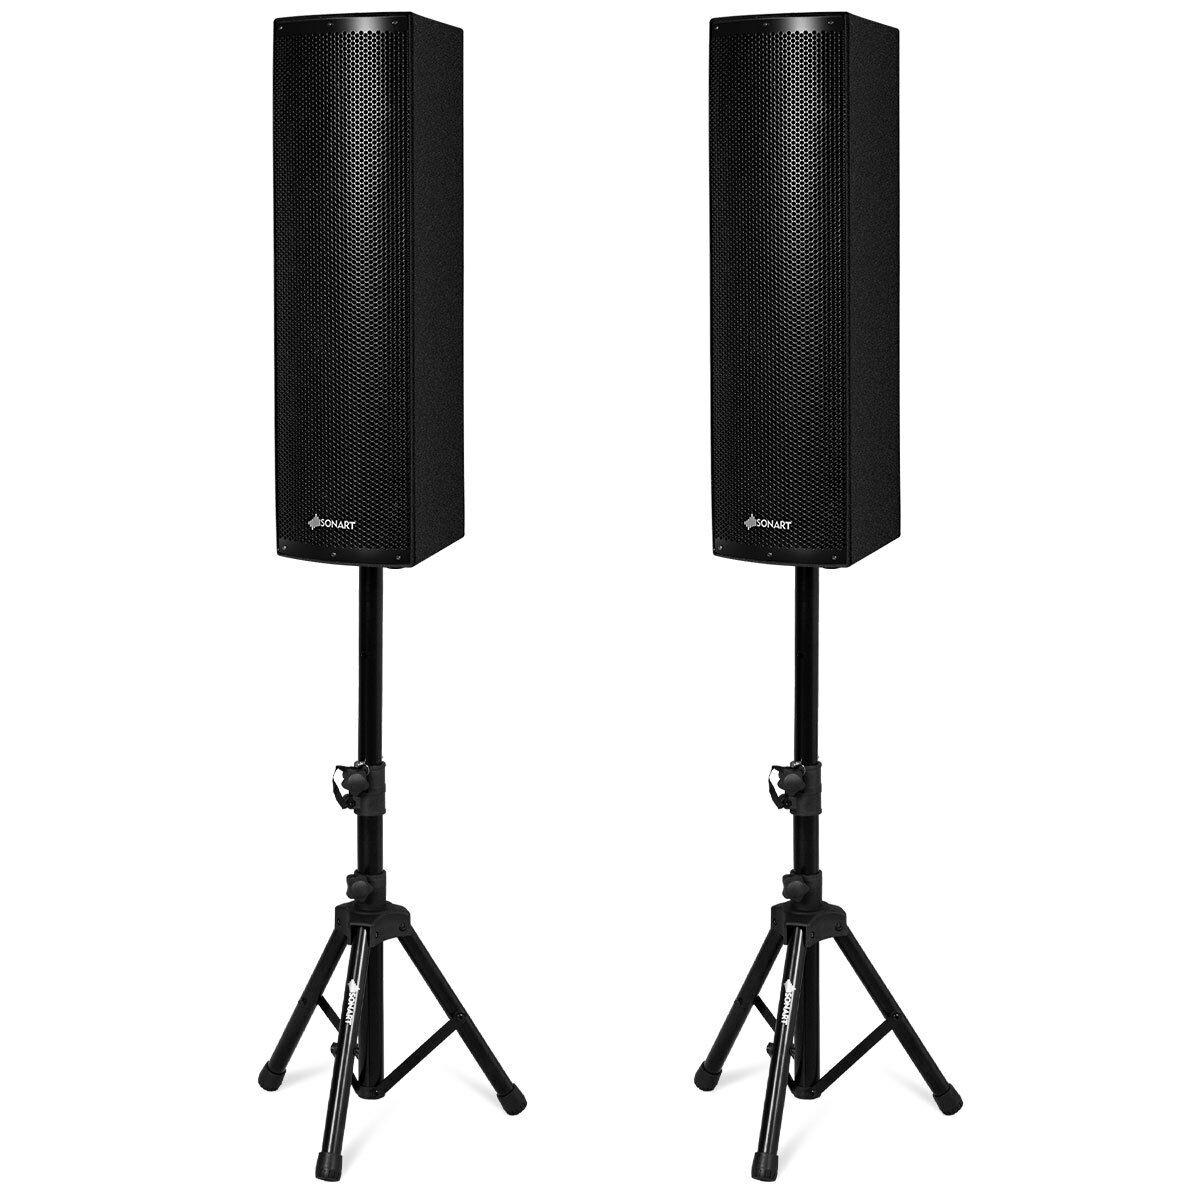 Costway Sonart 2000W Set of 2 Bi-Amplified Speakers PA System with 3-Channel & Stands